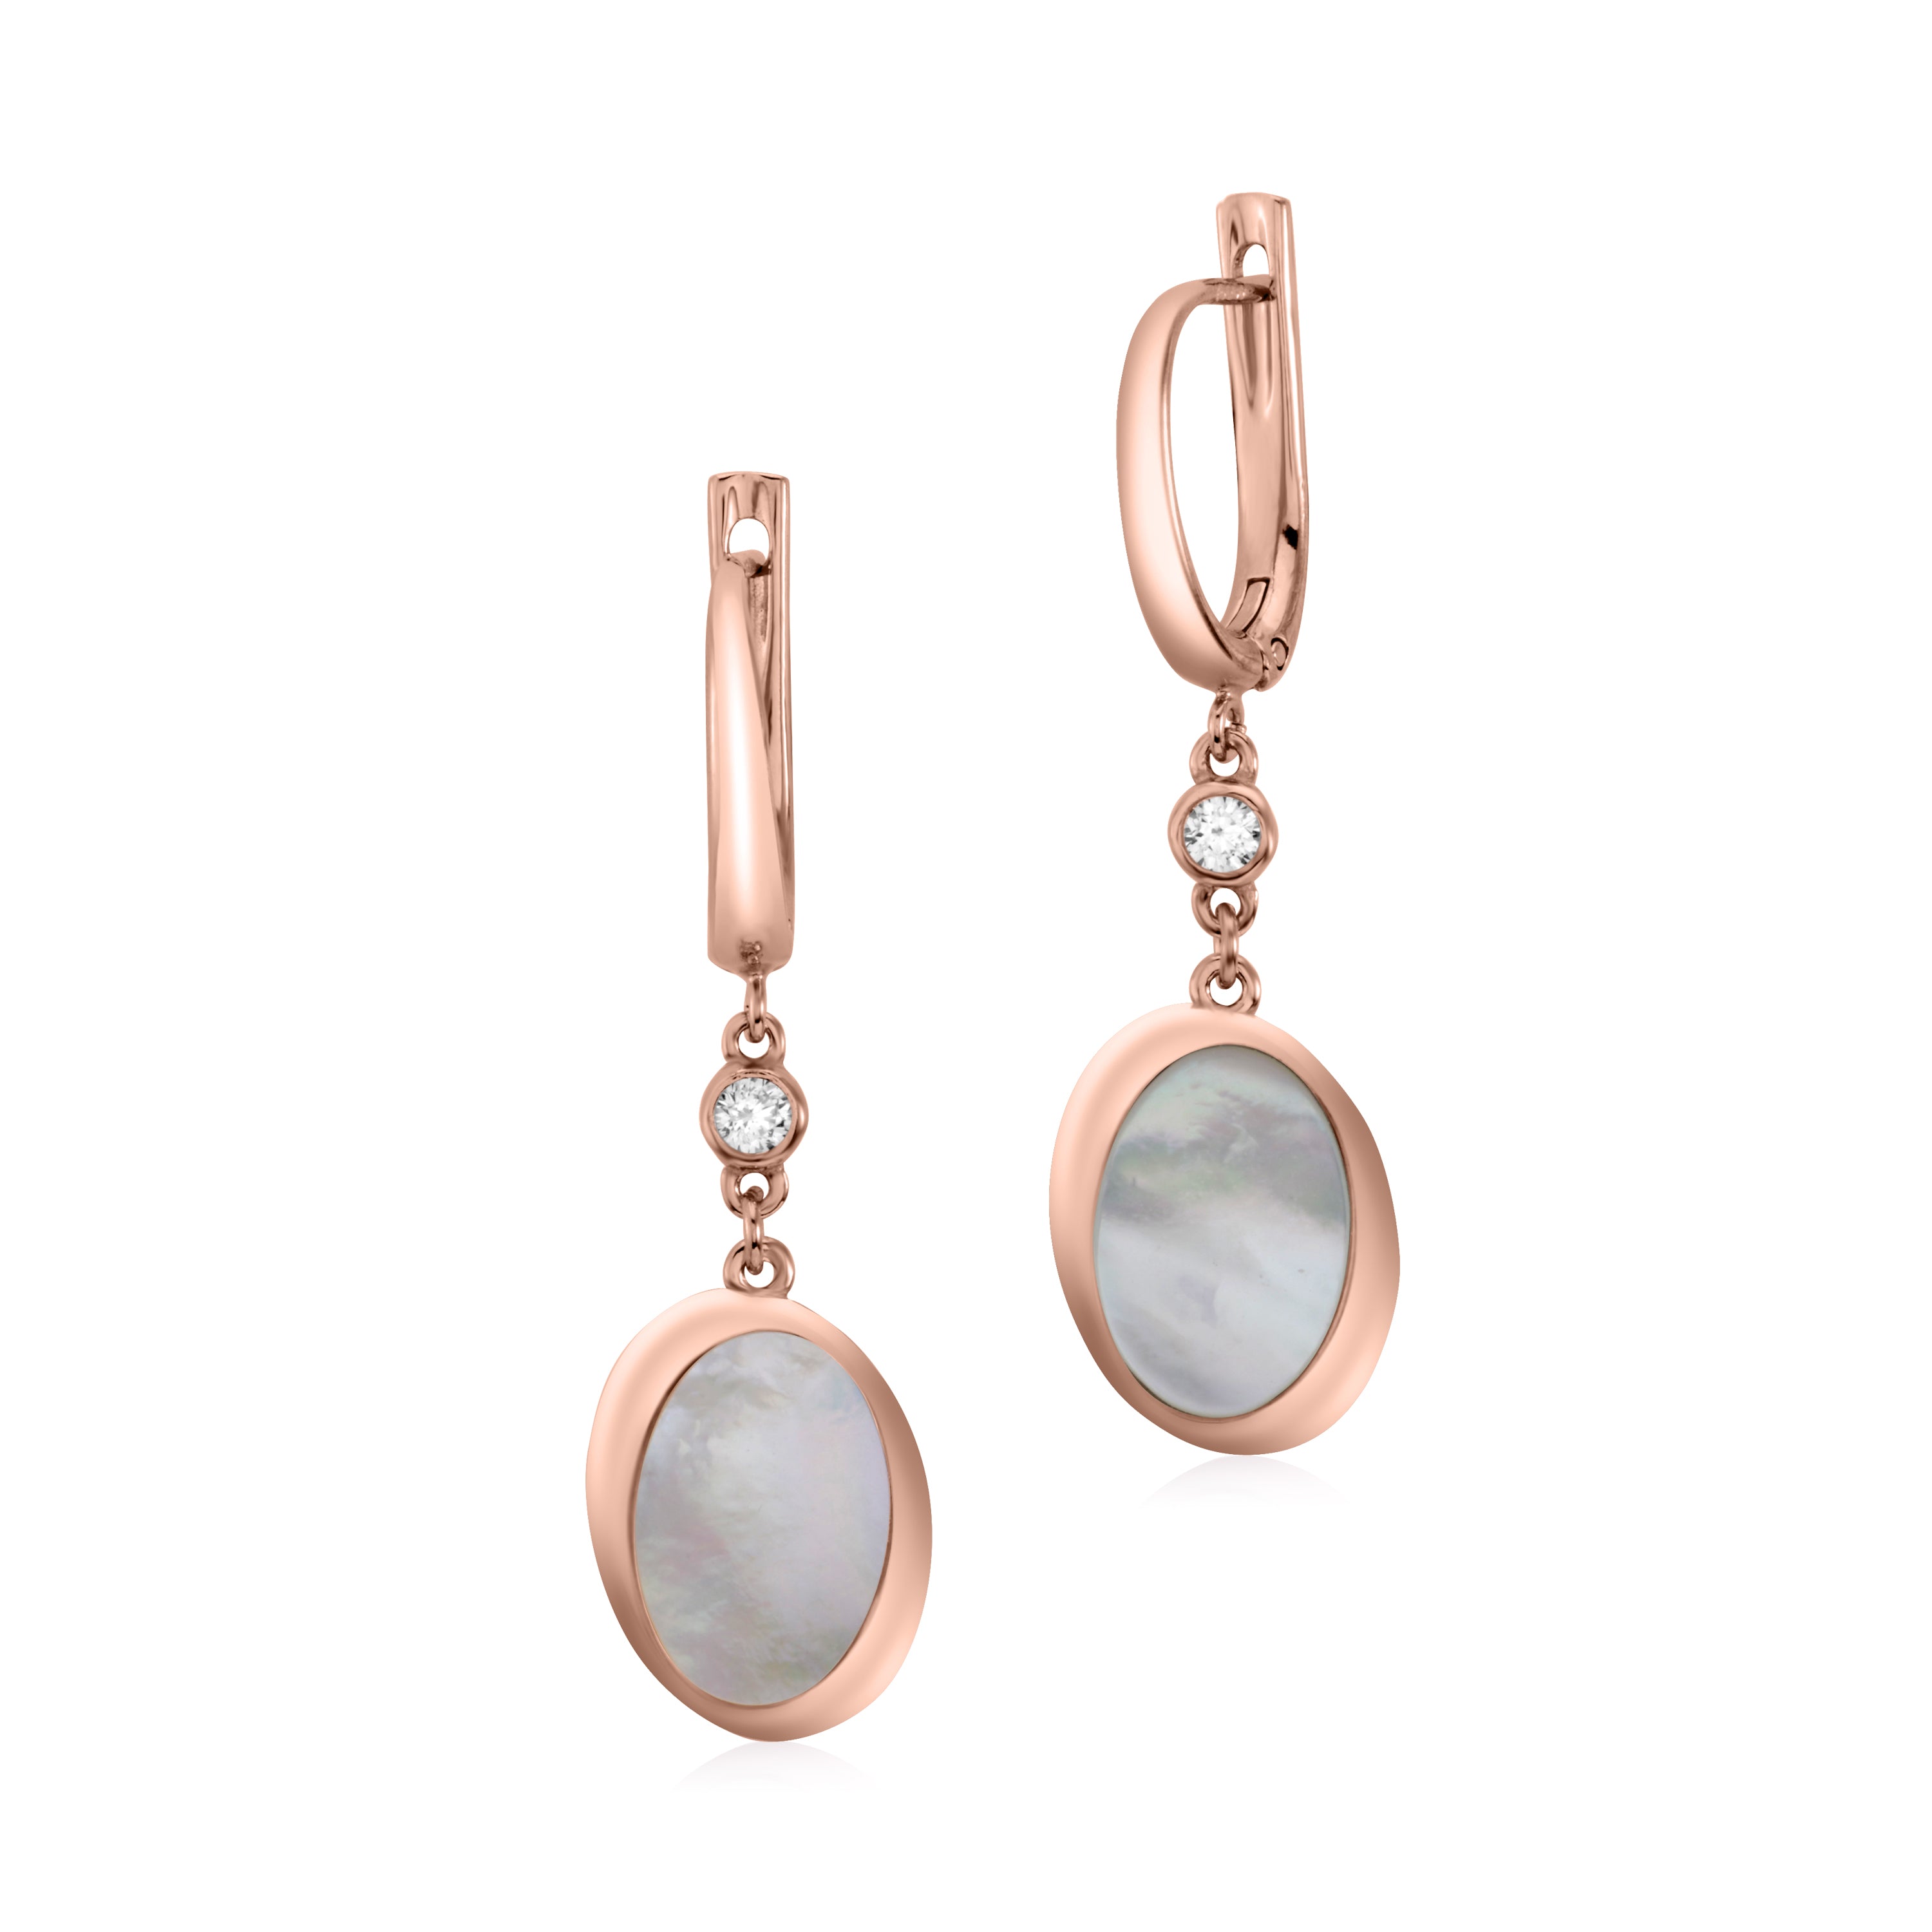 Sterling Silver Leverback Earrings with Bezel Set CZ and Modern Oval Mother of Pearl Dangle